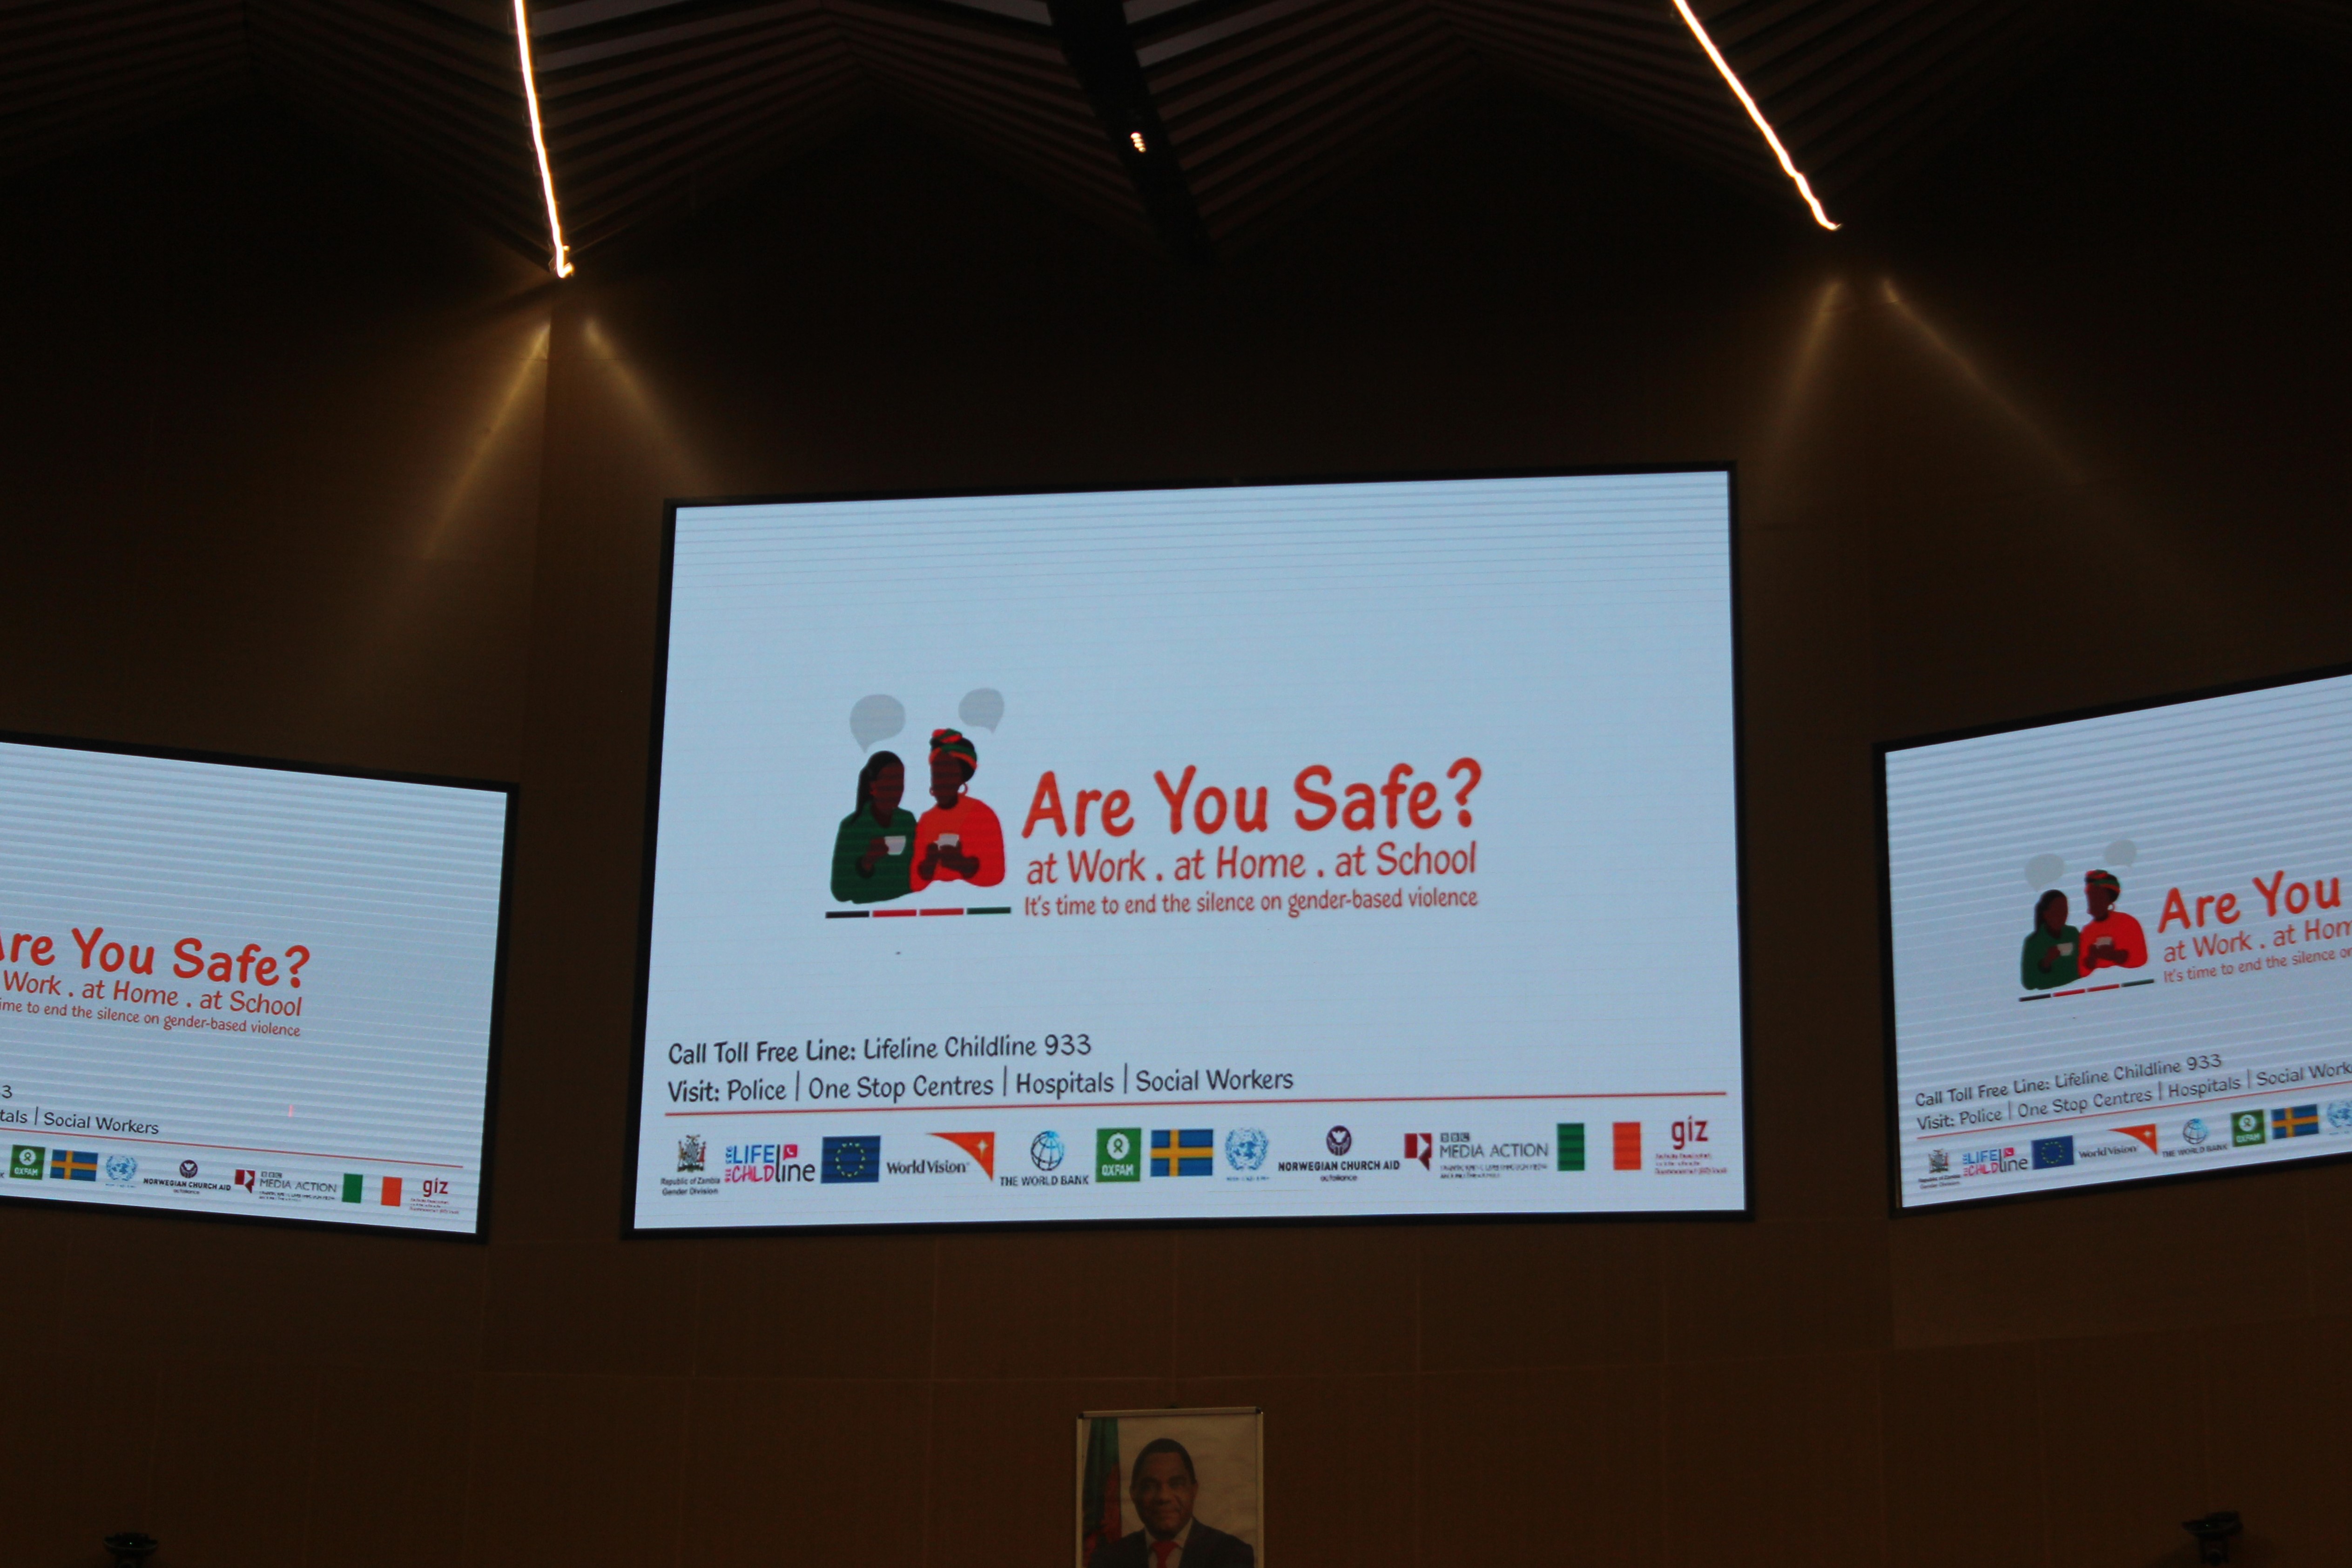 A screen at the TV launch of 16 Days of Activism Campaign in Zambia. The text reads: "Are You Safe? at Work. at Home. at School. It's time to end the silence on gender-based violence" This is part of the local theme for 2022